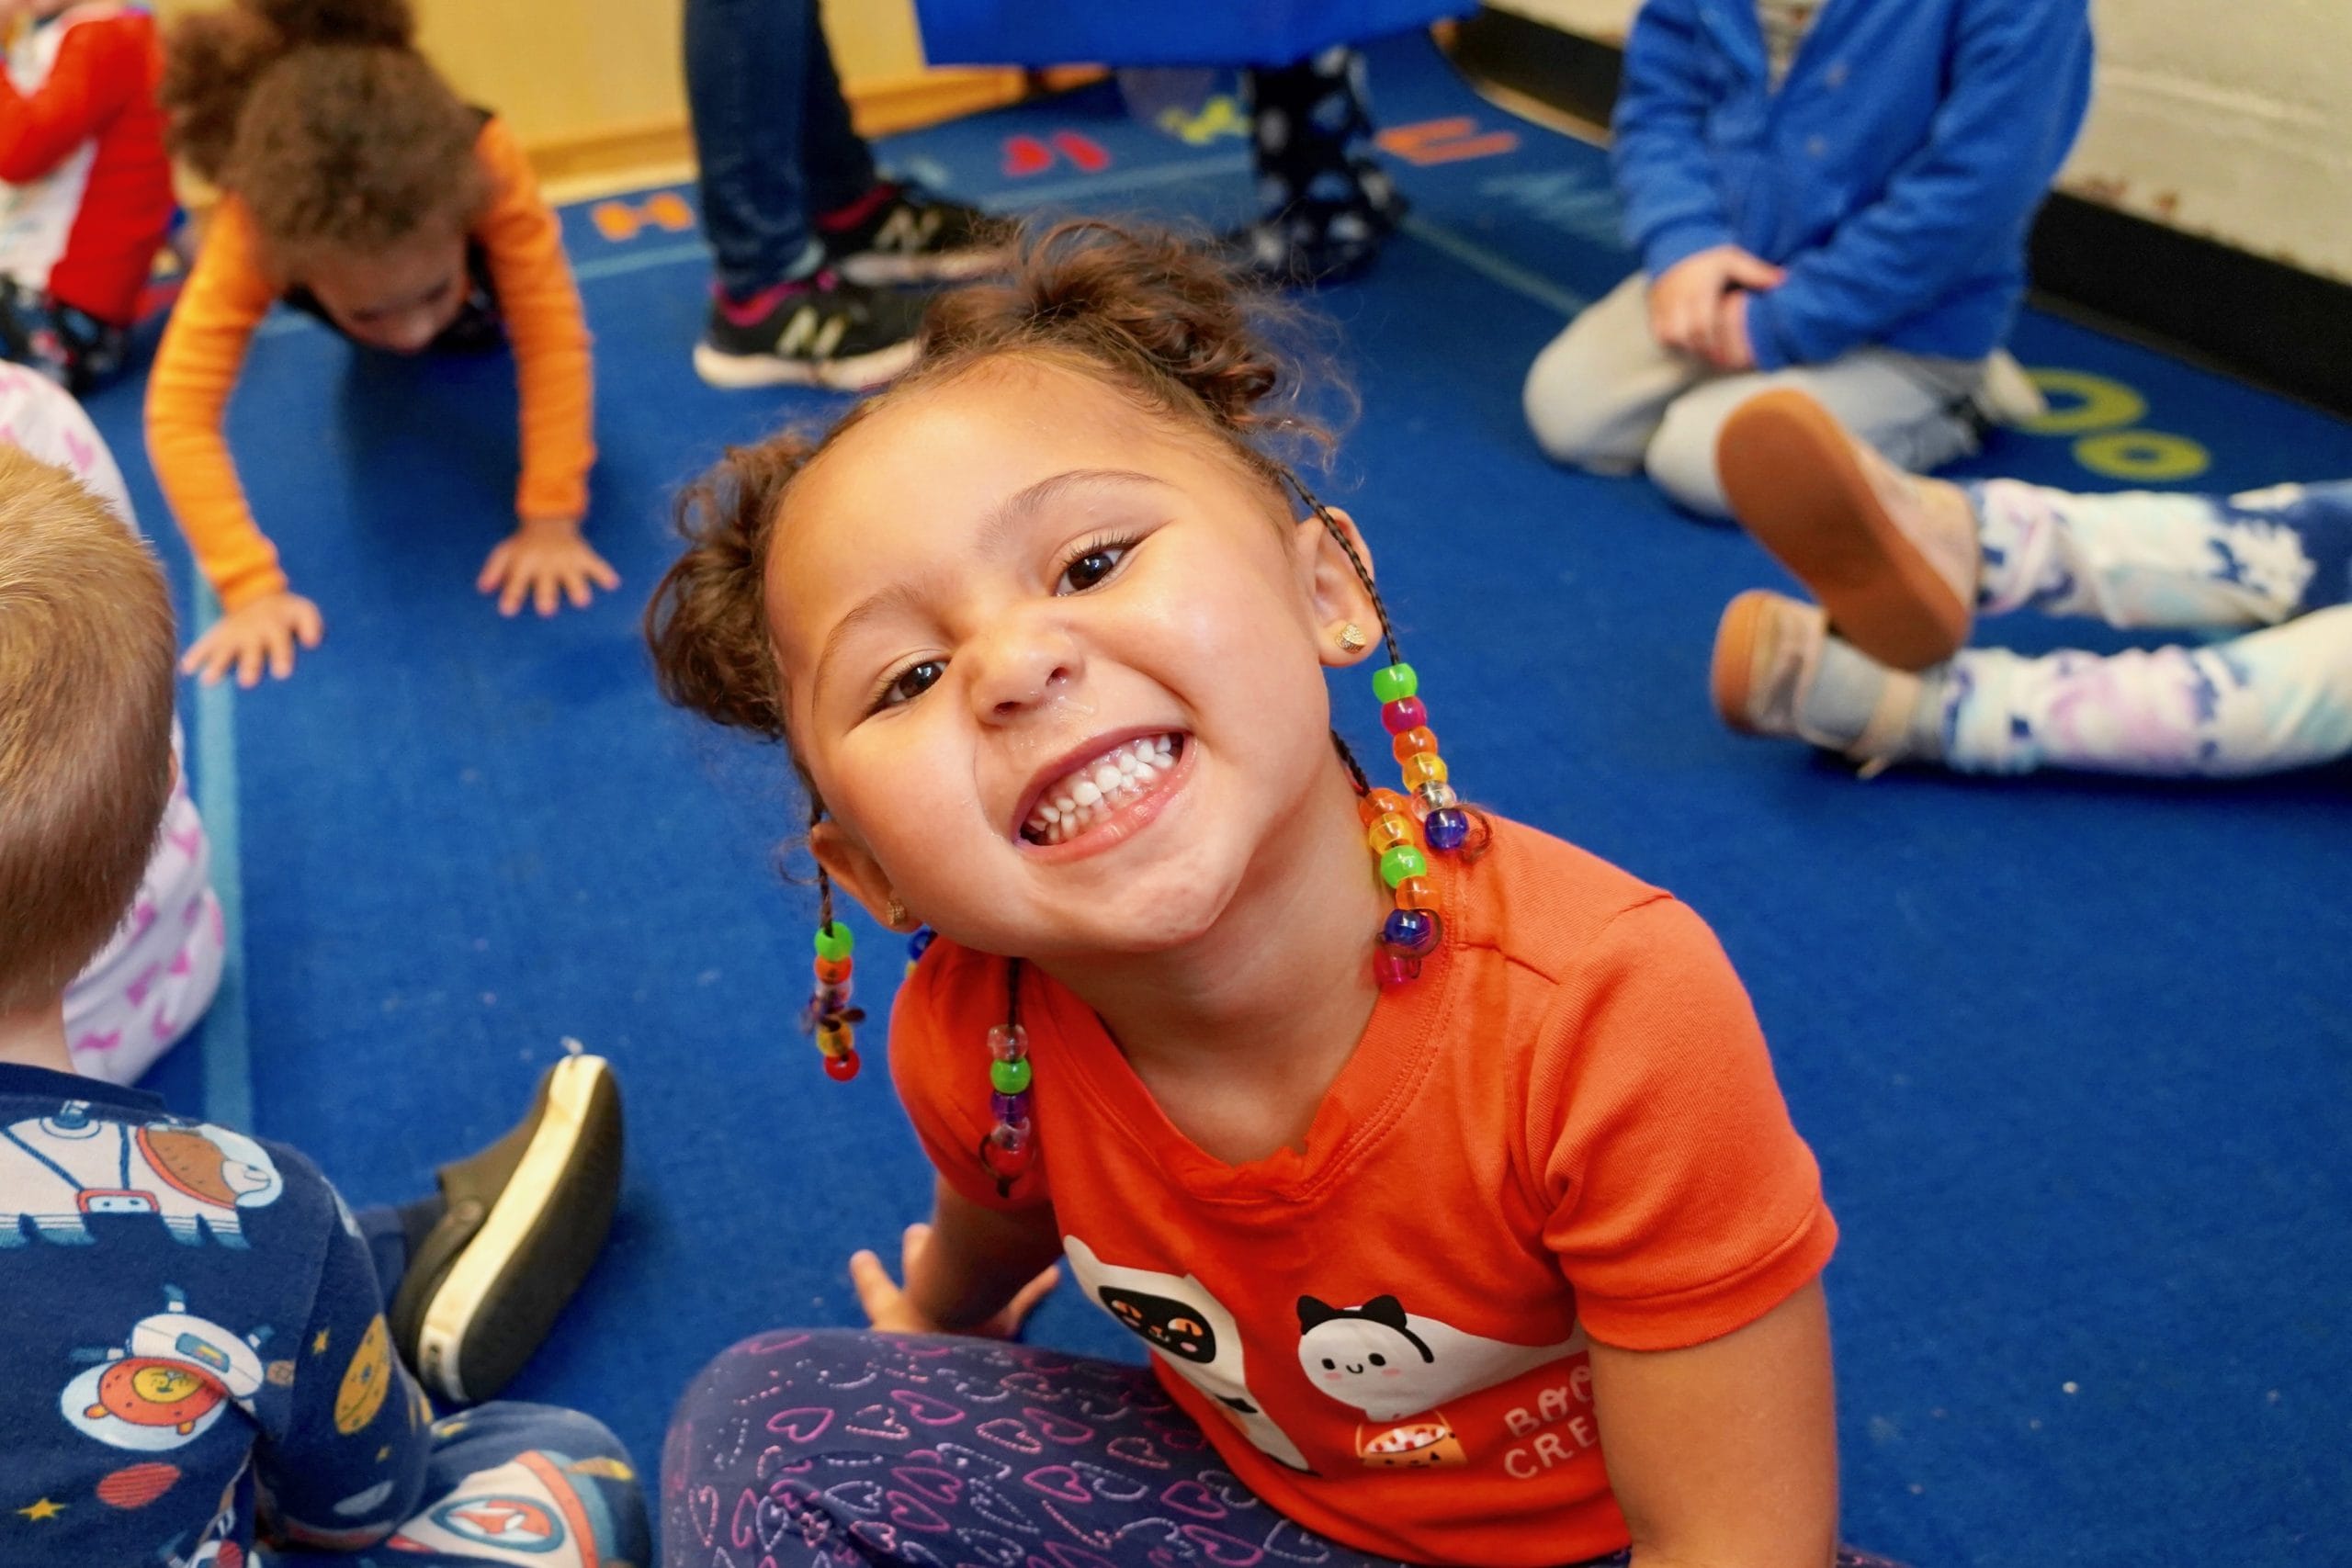 4 year old girl smiling during music class